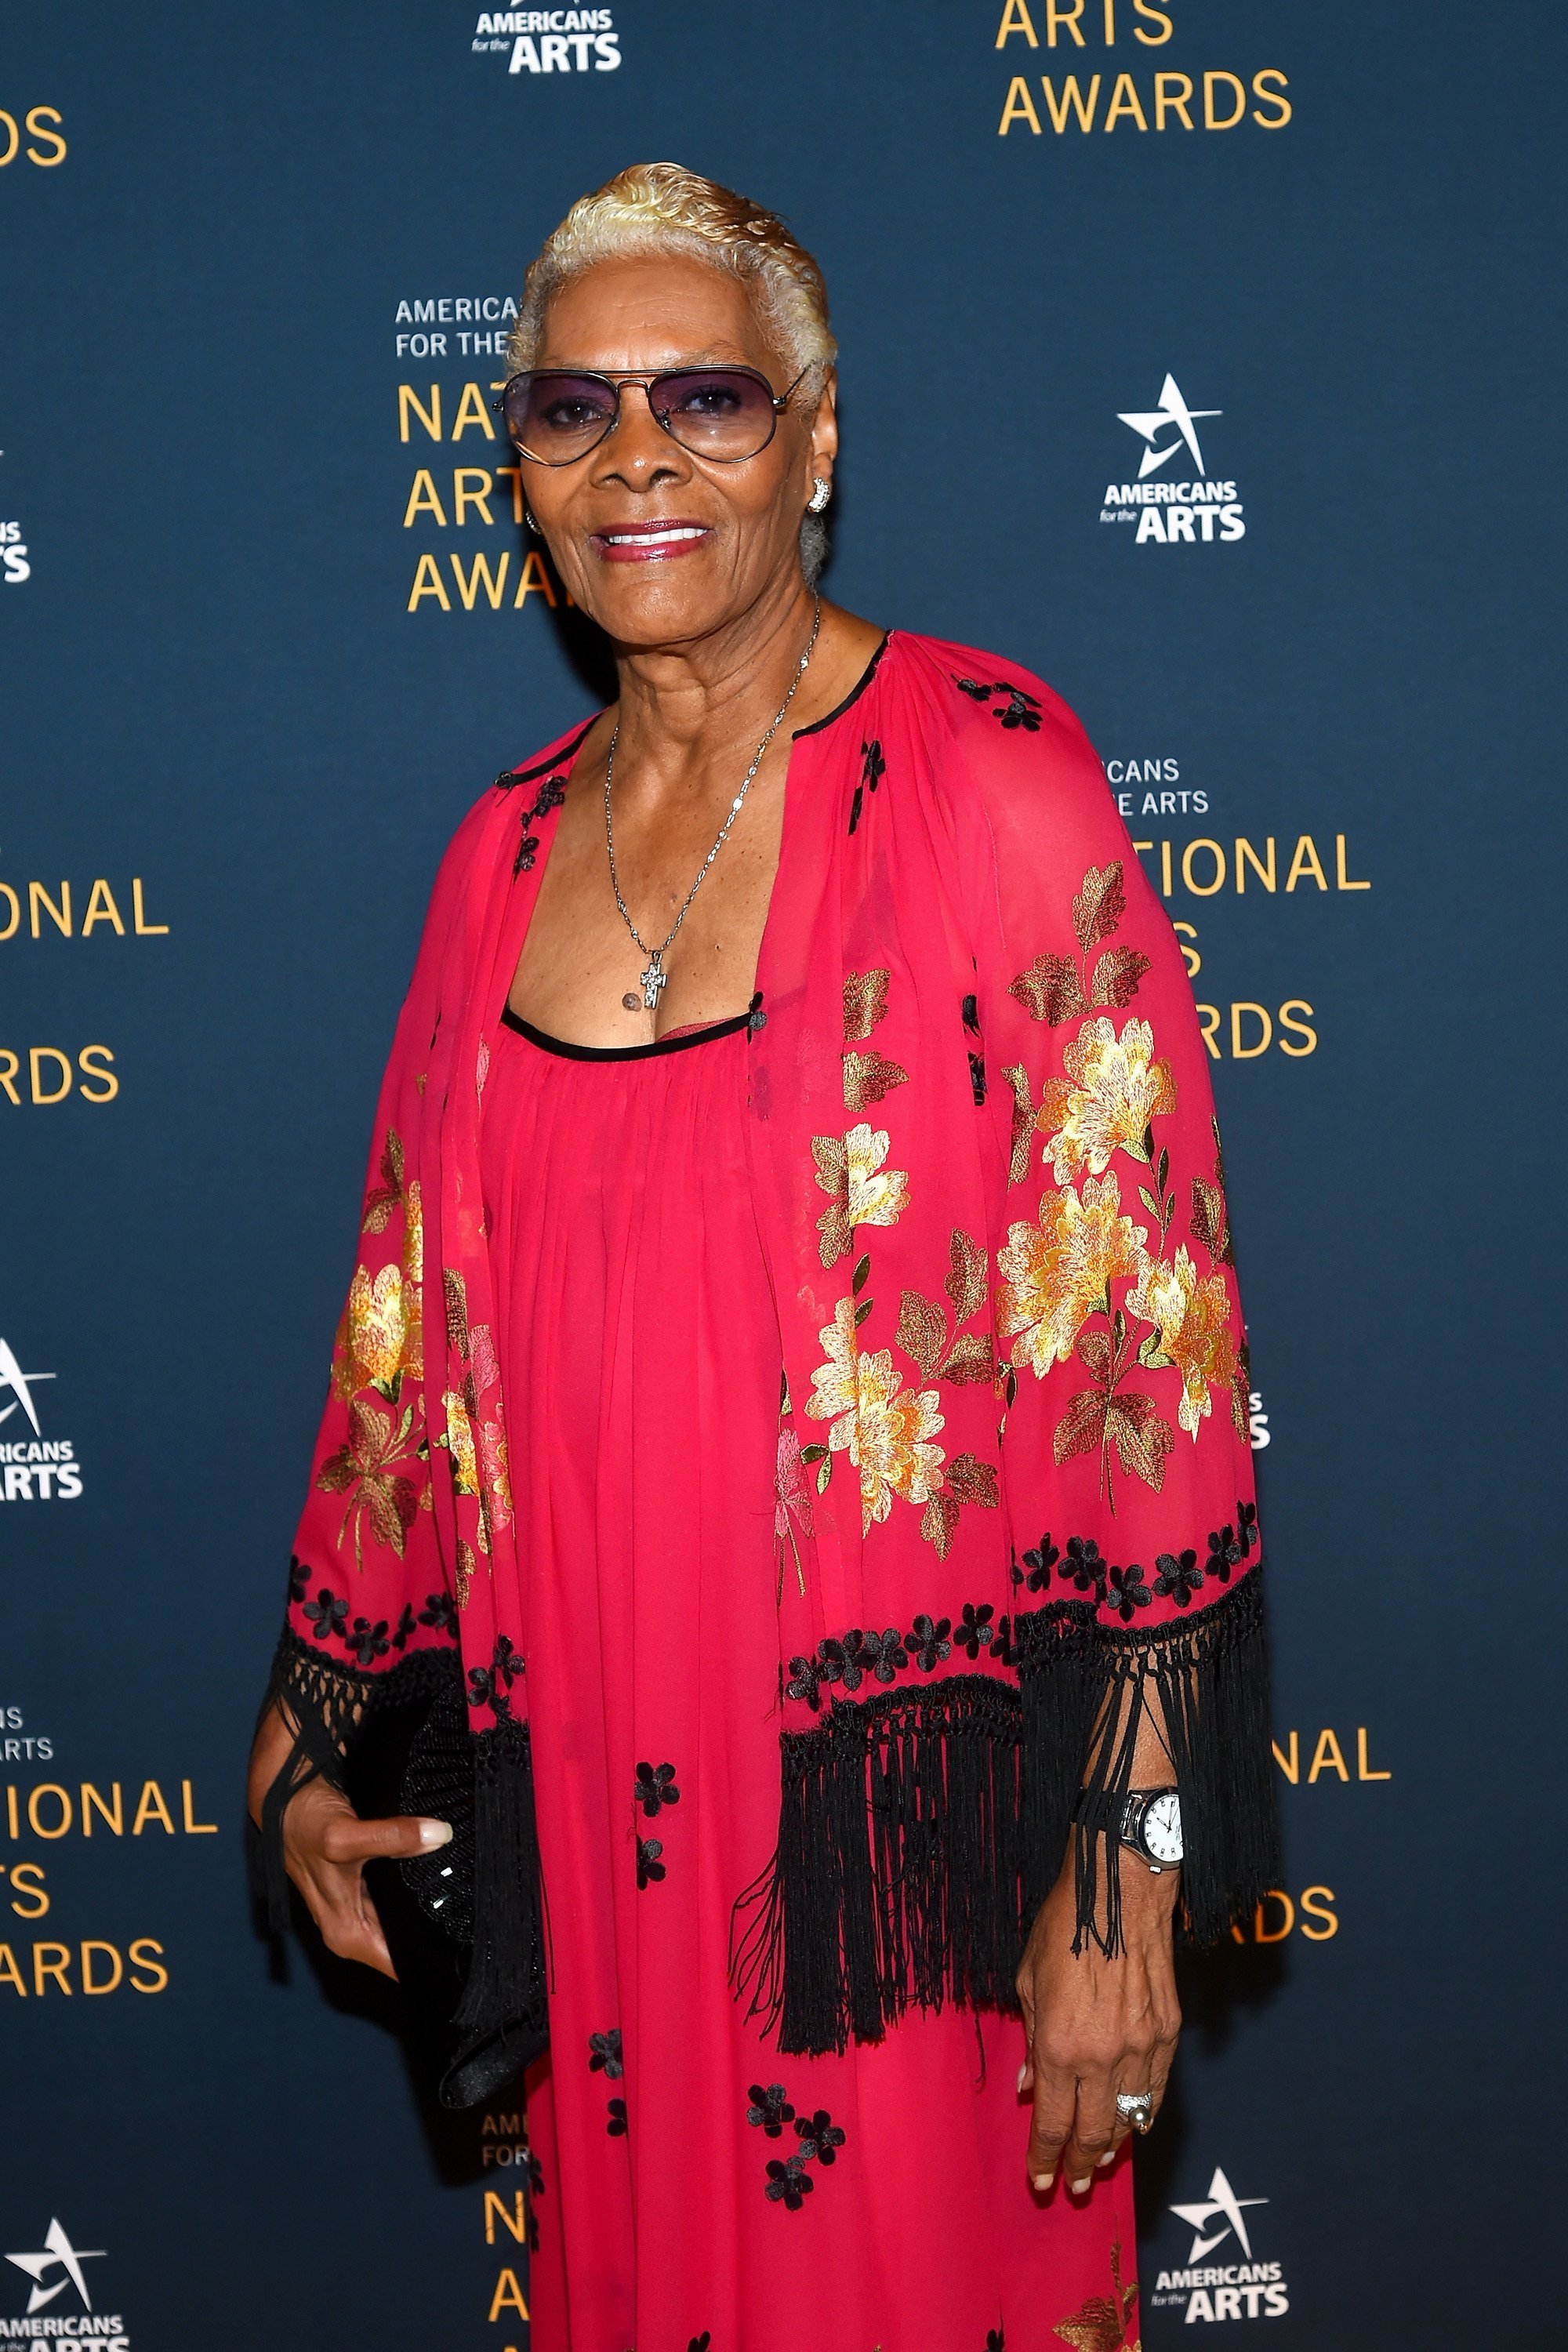 Dionne Warwick attends the 2017 National Arts Awards at Cipriani 42nd Street on October 23, 2017 in New York City.| Photo: Getty Images